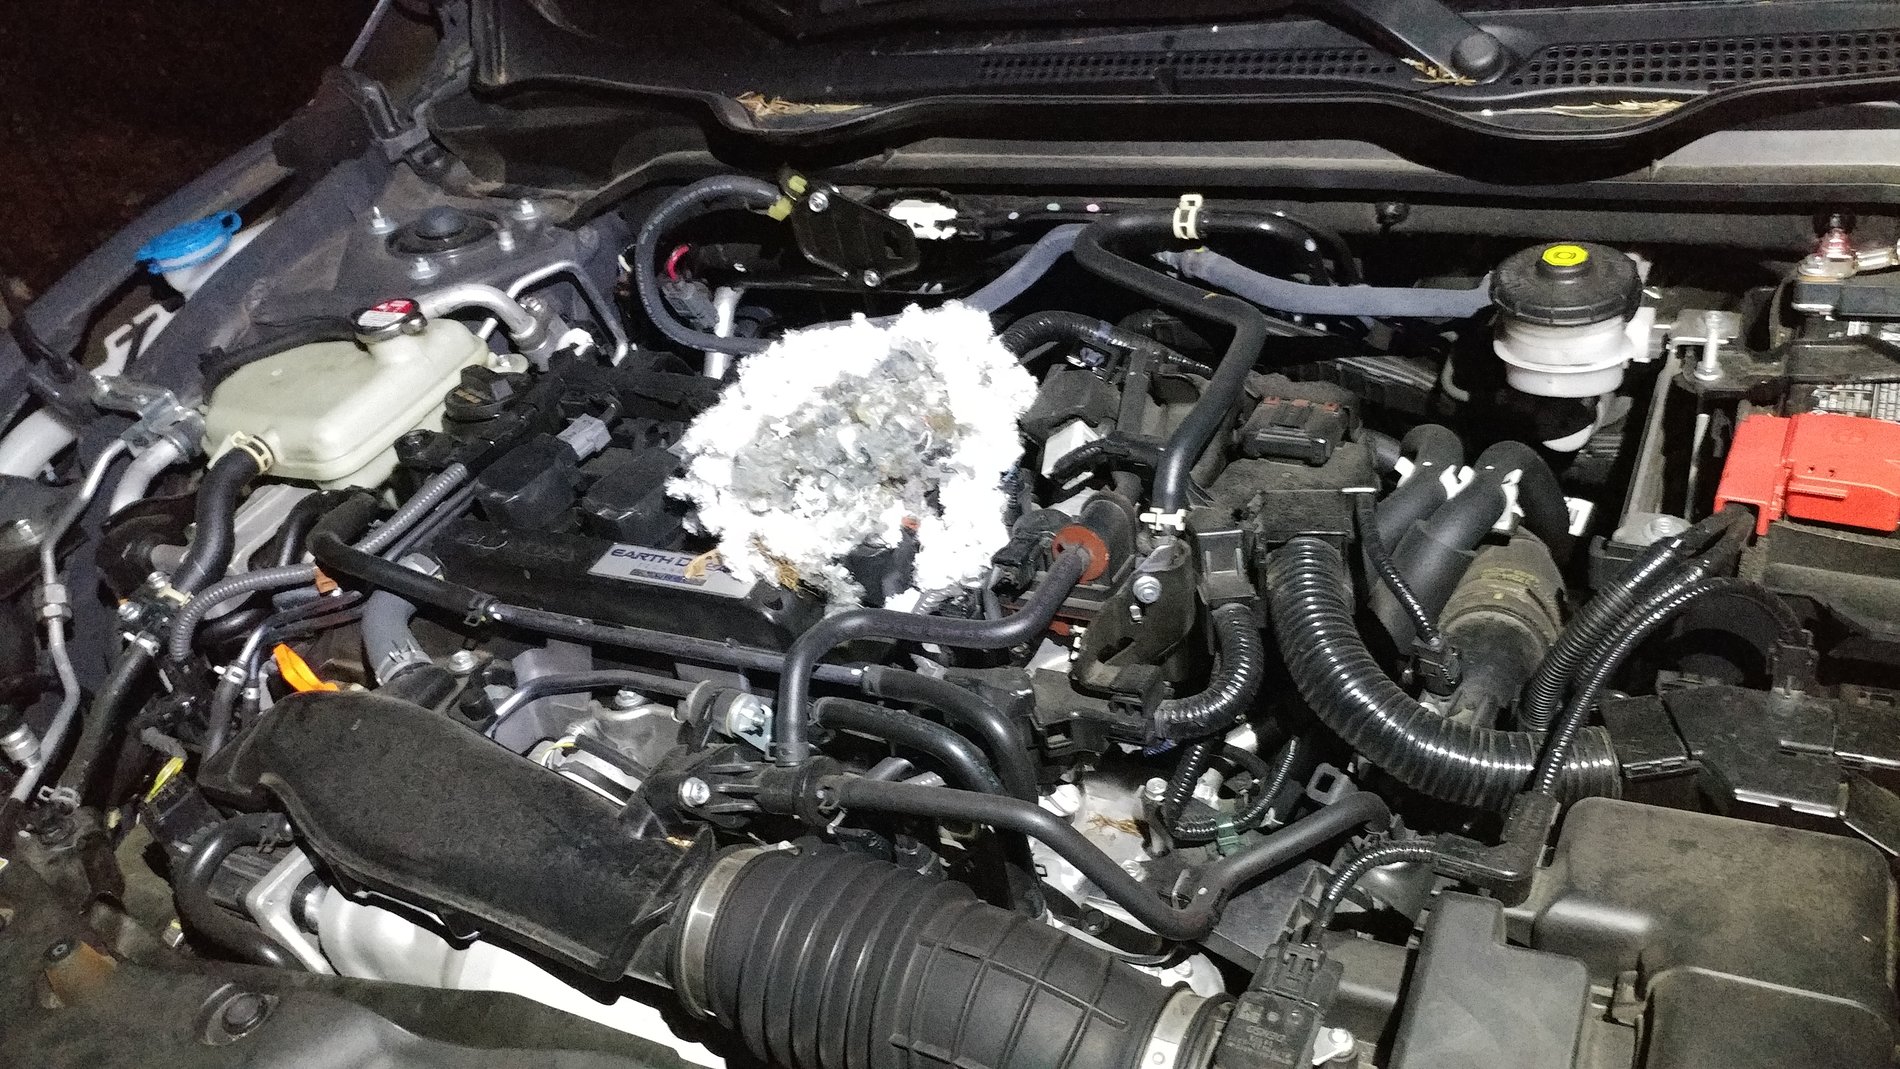 Honda Civic 10th gen Had a mouse, where else this insulation/deadener? 20190314_204919_HDR